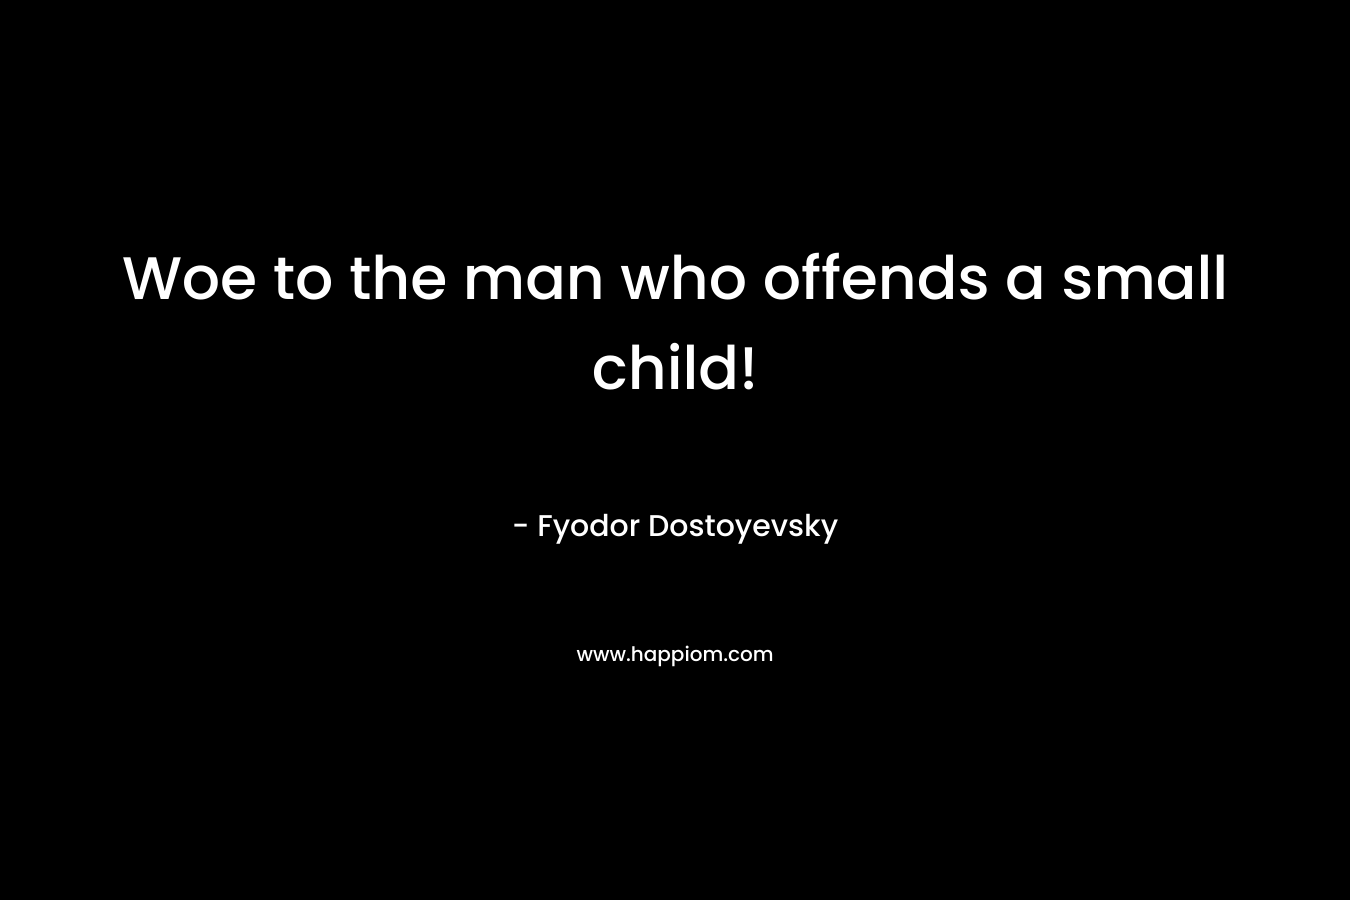 Woe to the man who offends a small child! – Fyodor Dostoyevsky